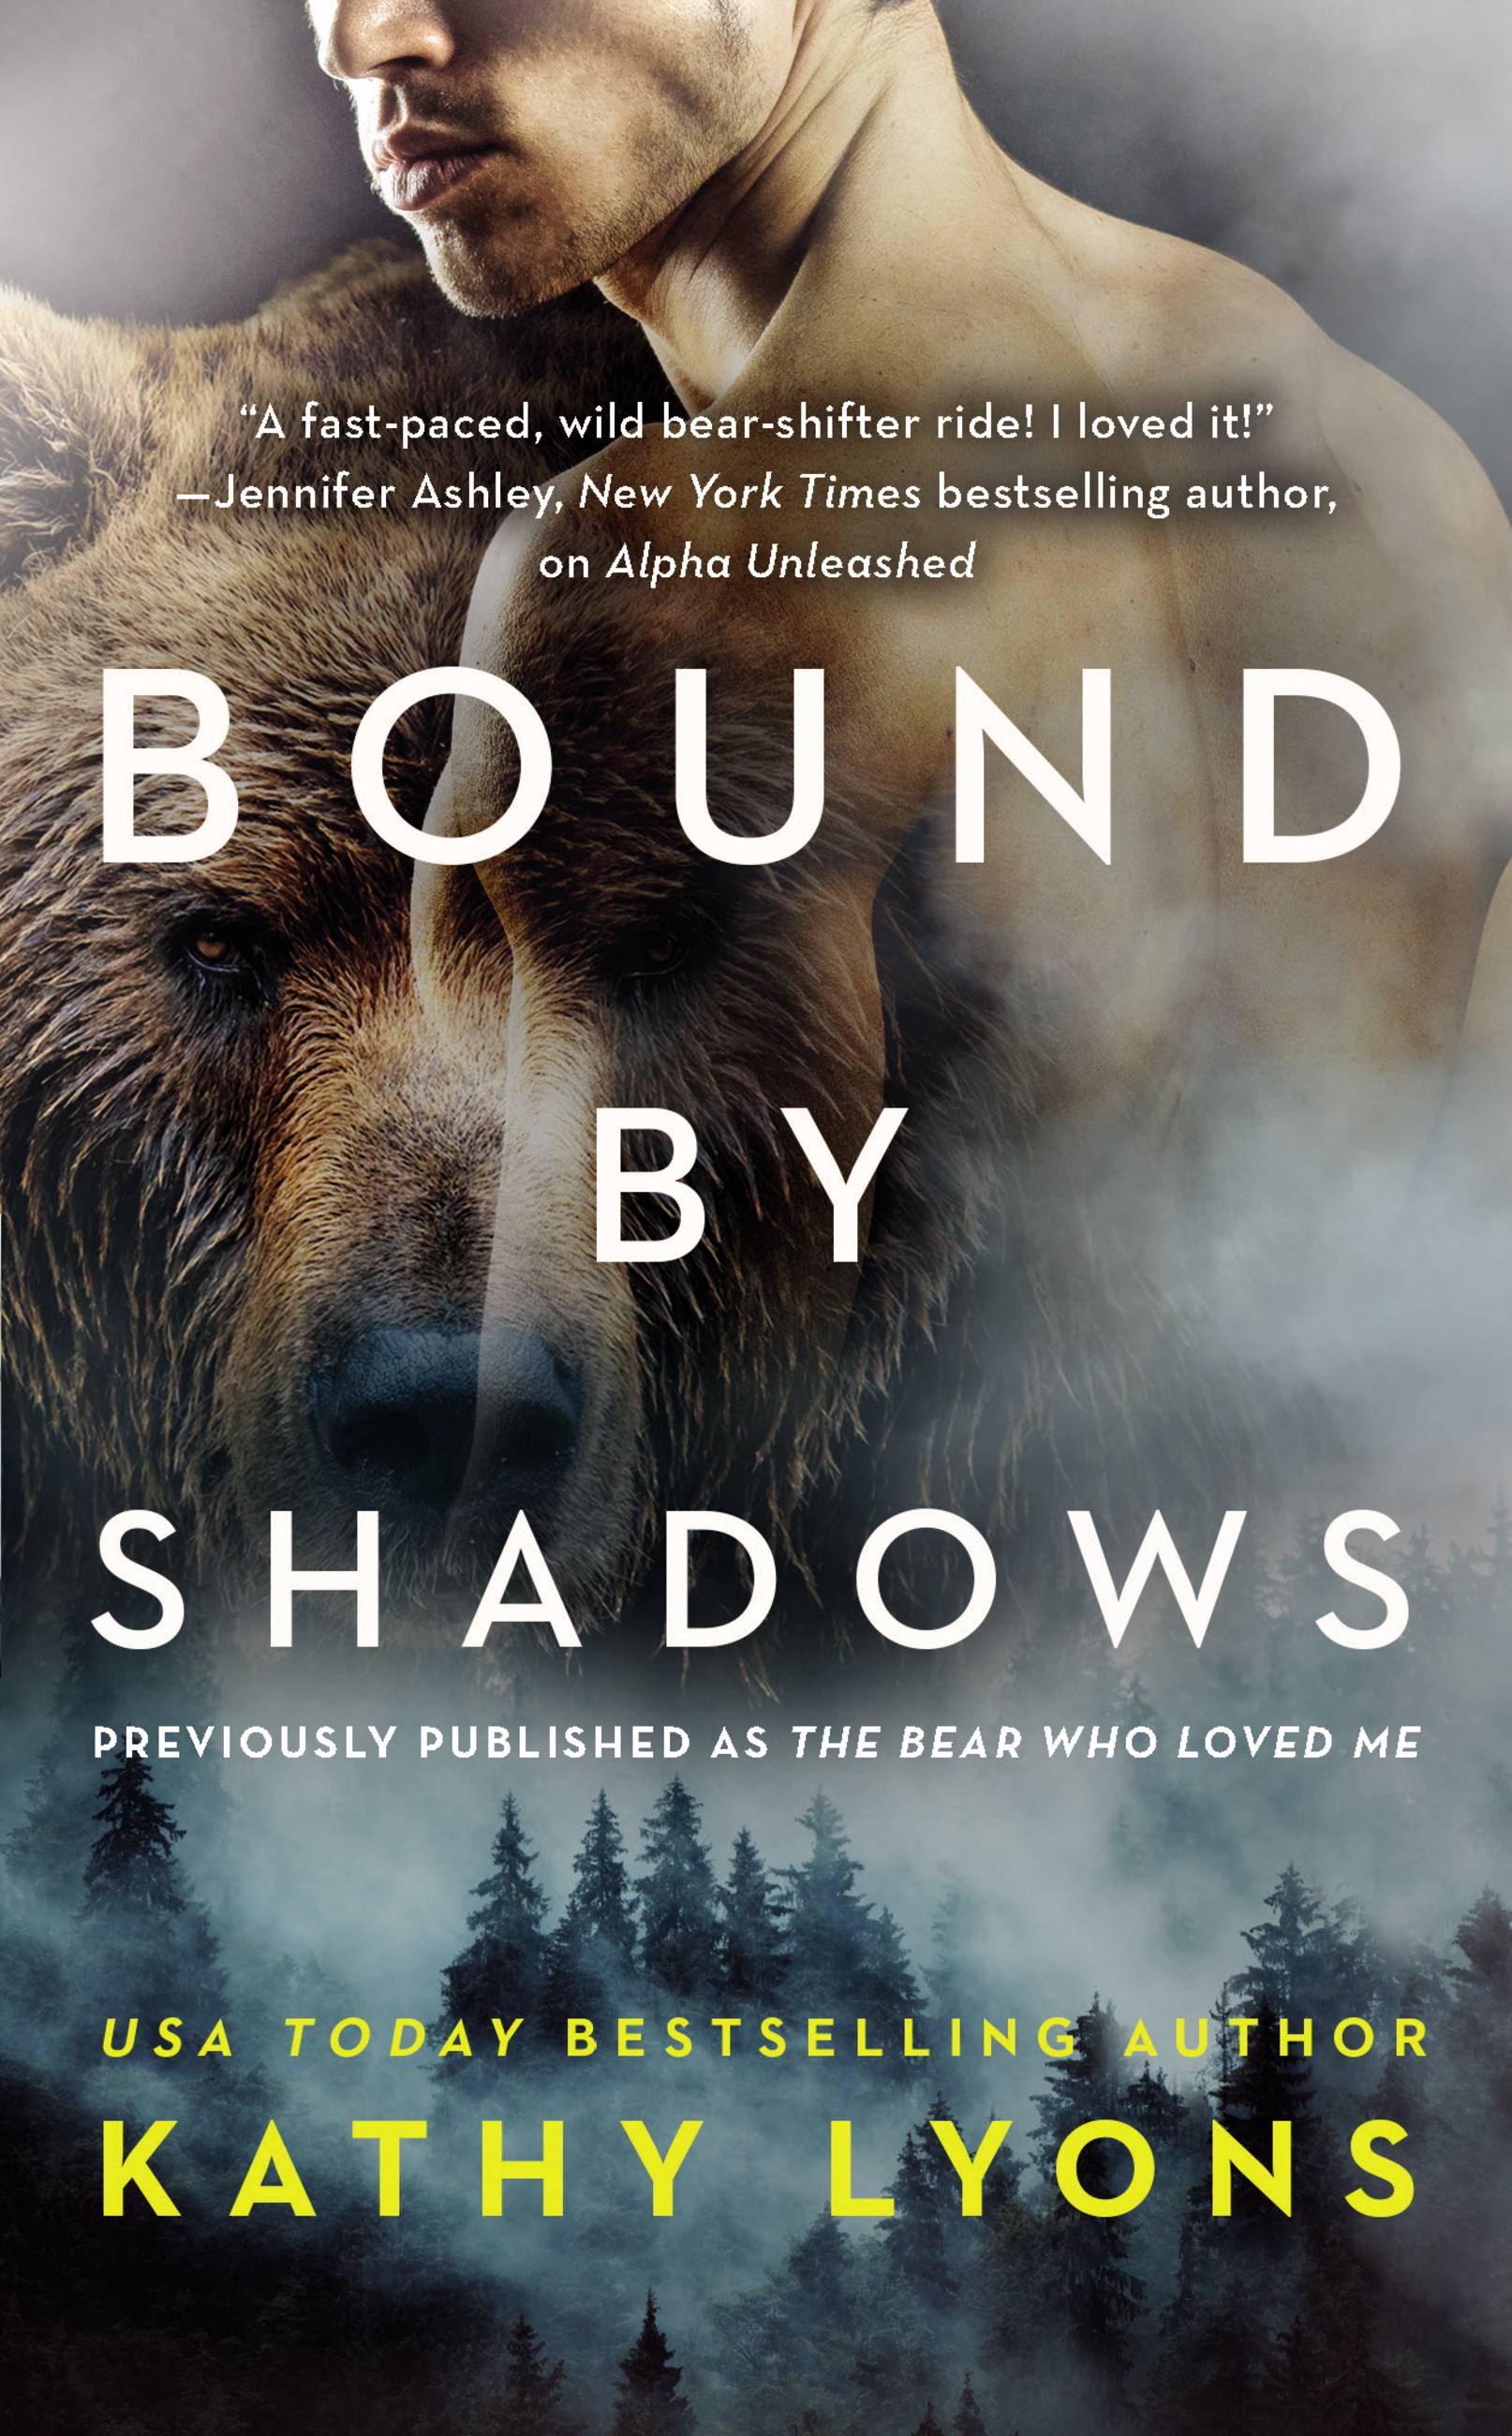 Bound by Shadows (previously published as The Bear Who Loved Me) by Kathy Lyons Hachette Book Group